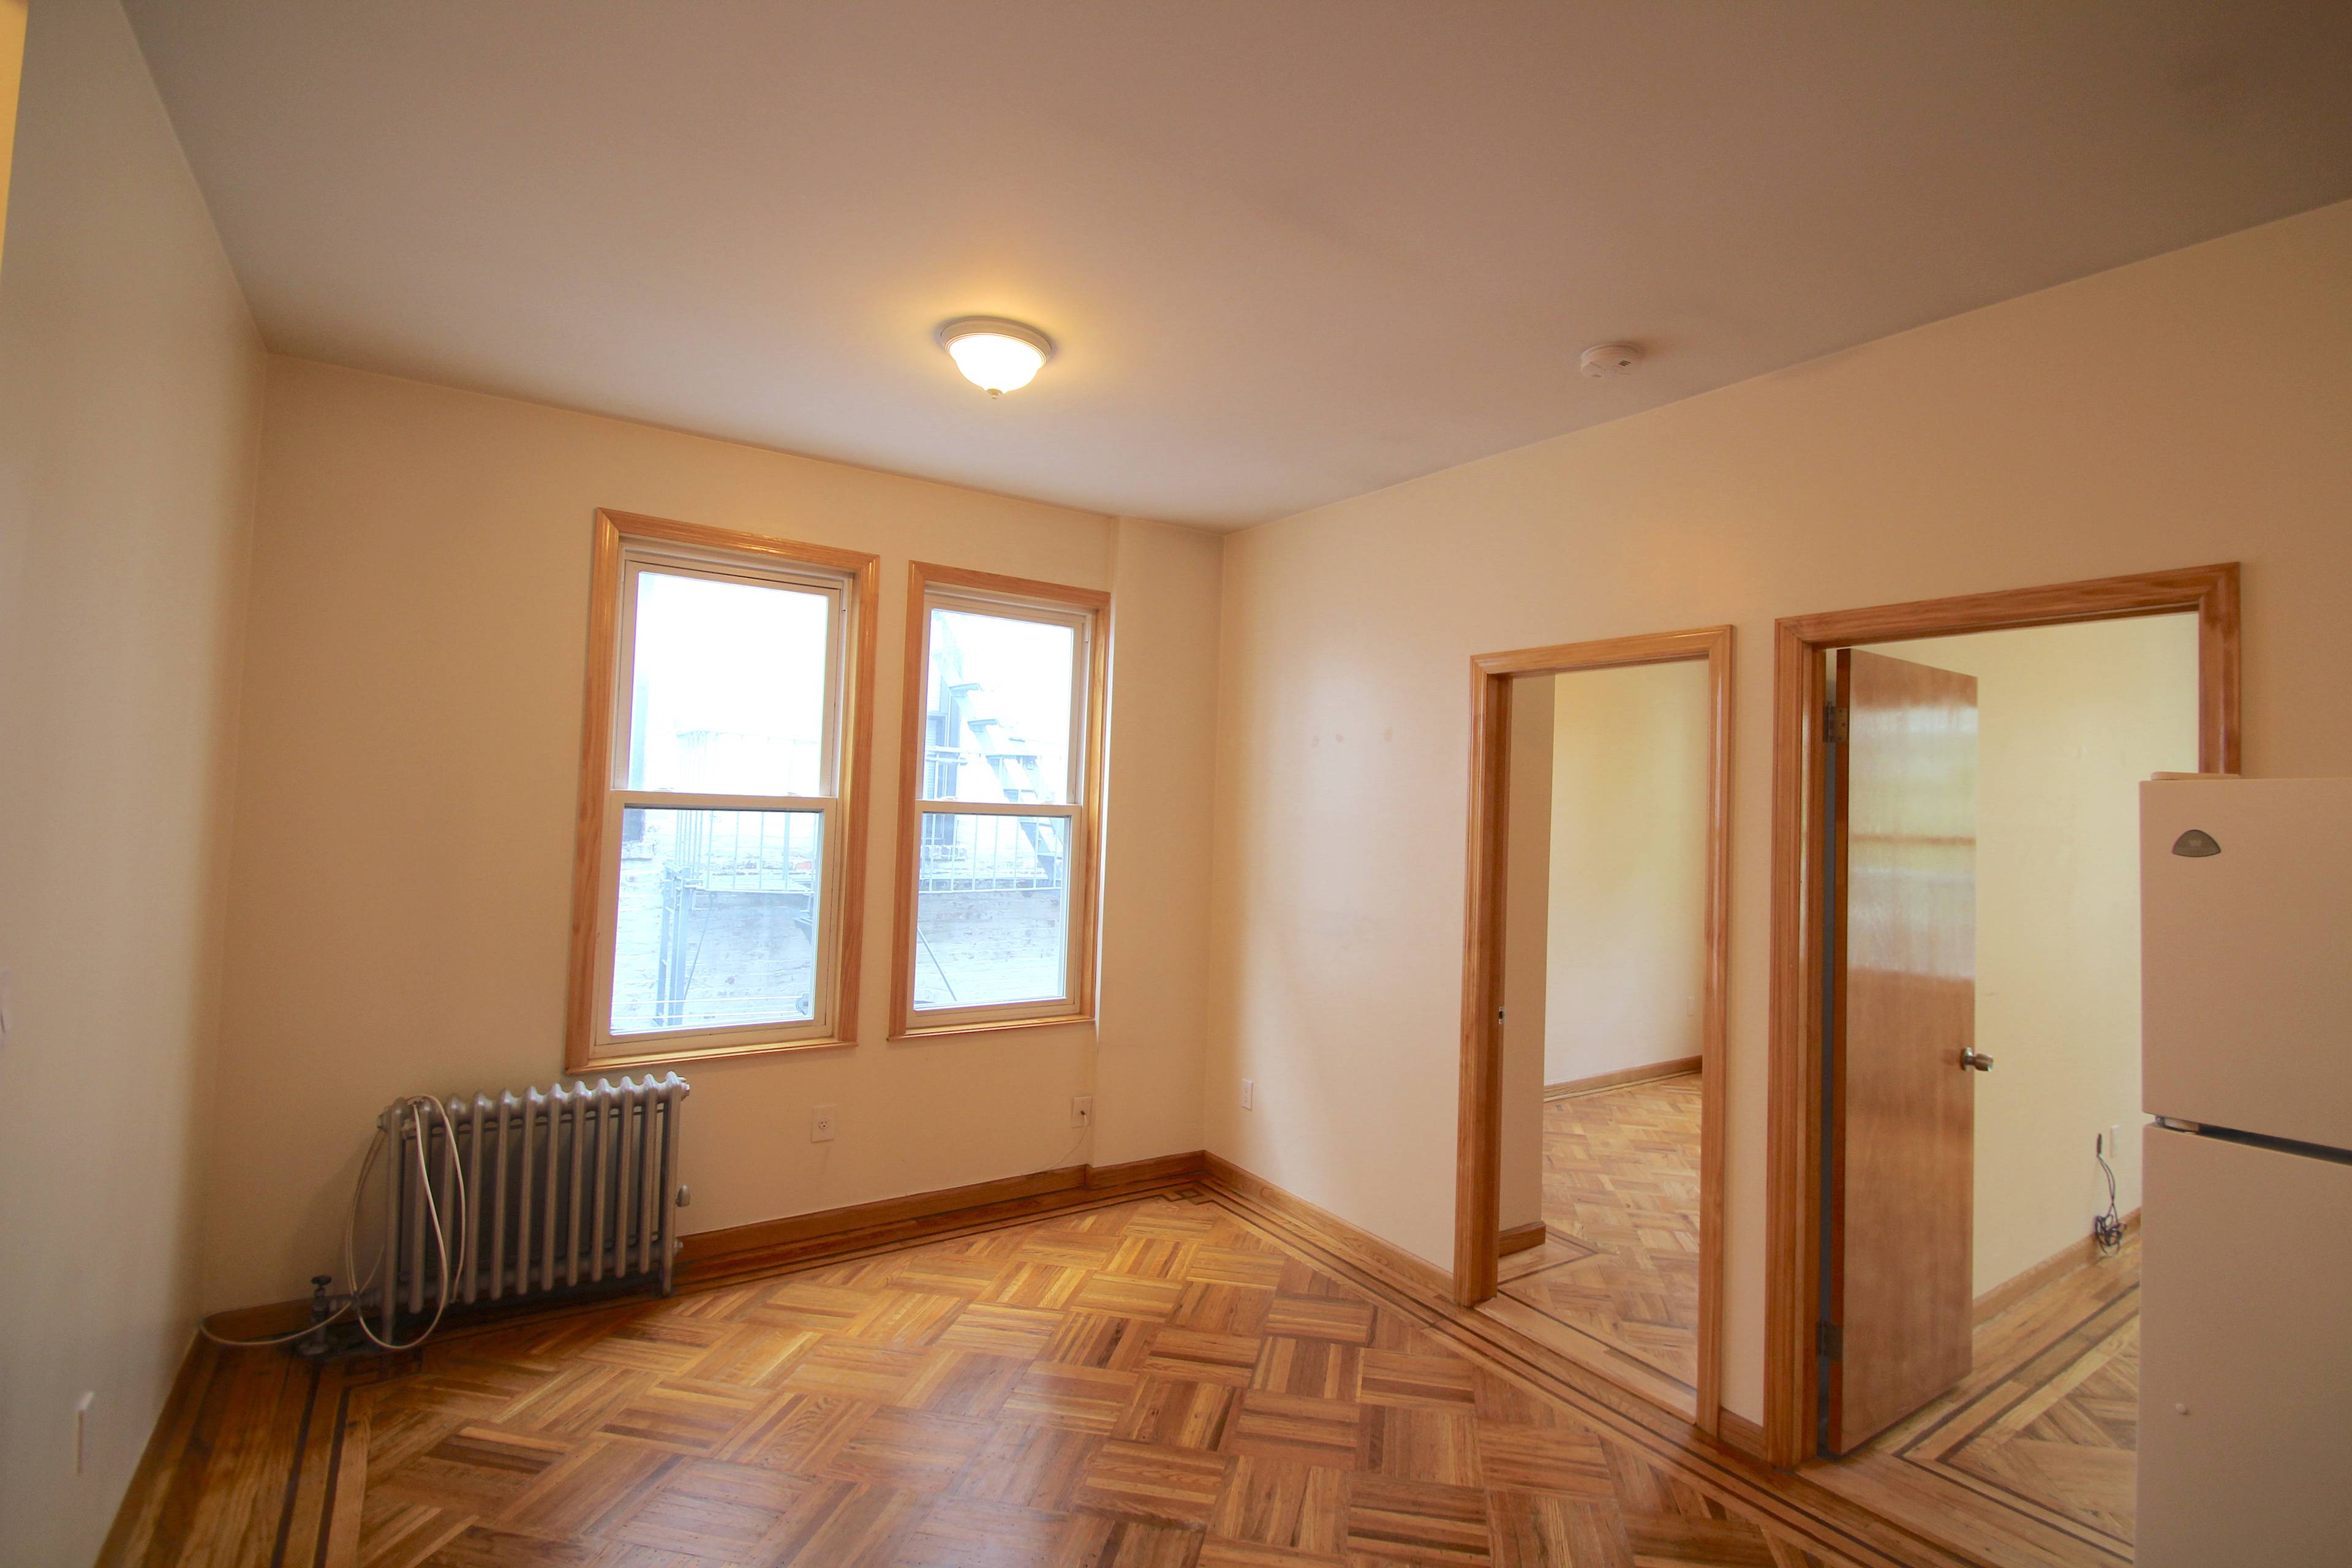 Astoria: First Floor - Rent Stabilized 2 Bedroom Apartment Off 30th Avenue